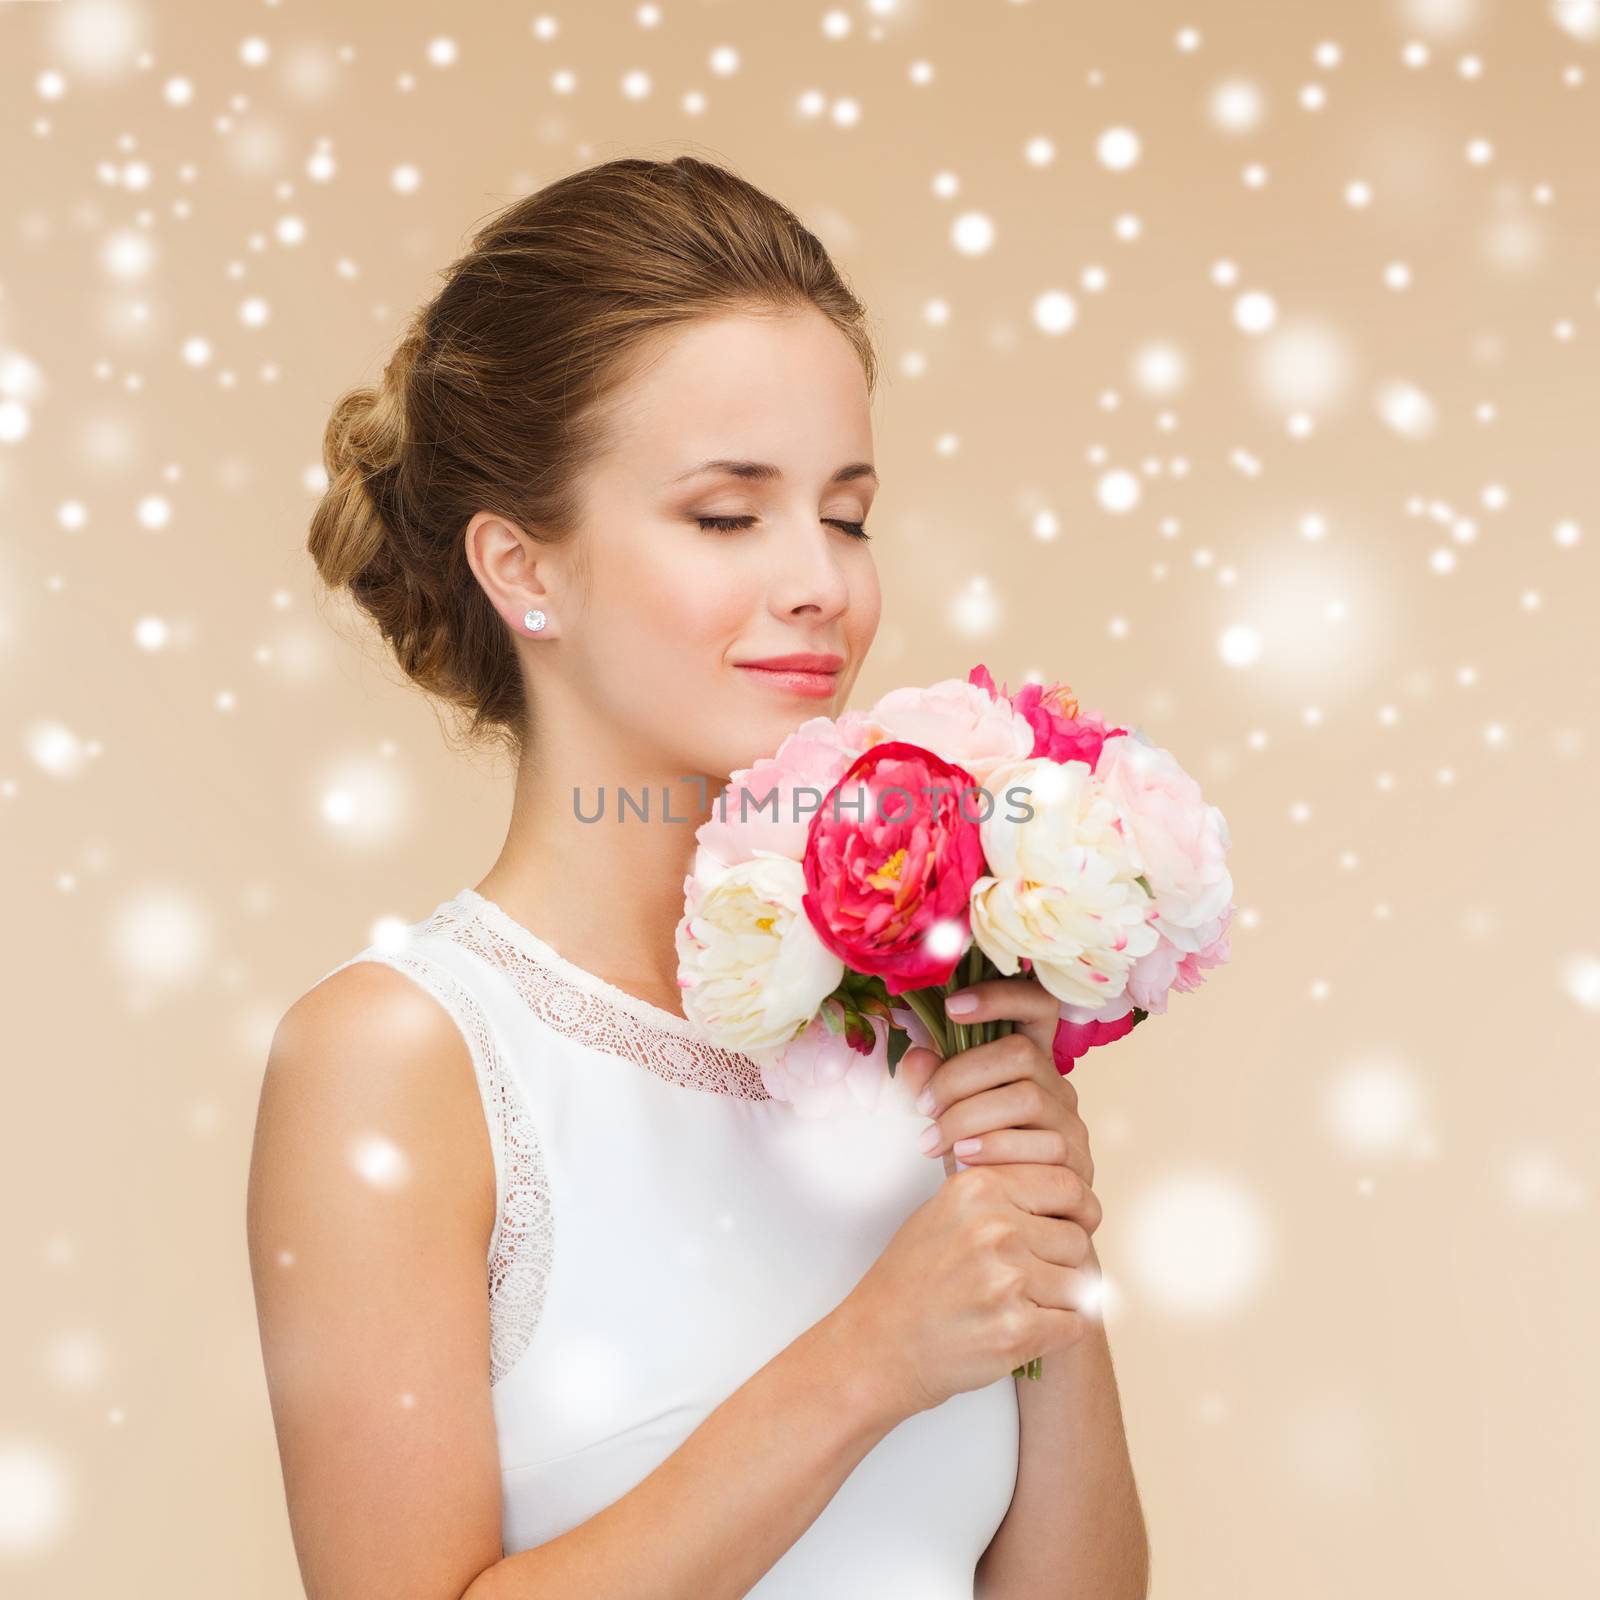 happiness, wedding, holidays and celebration concept - smiling bride or bridesmaid in white dress with bouquet of flowers over beige background and snow